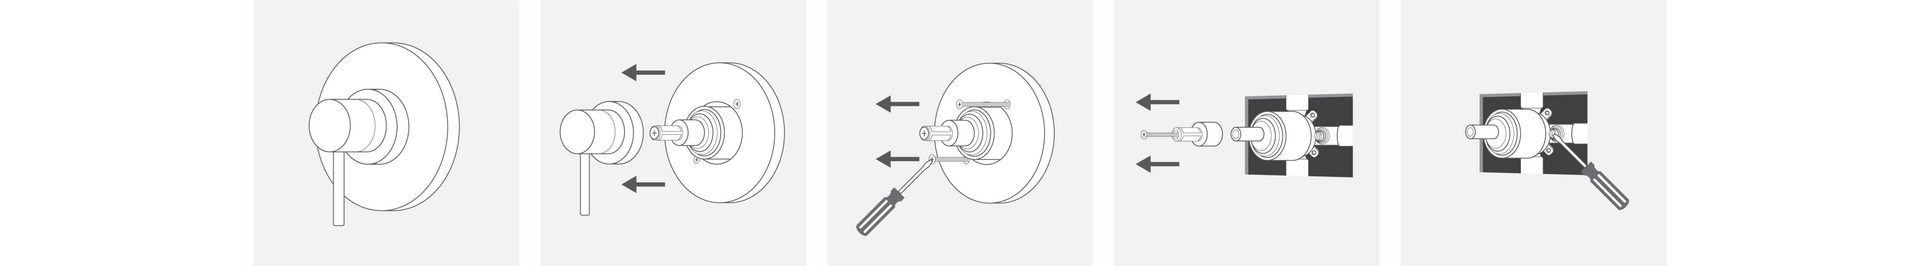 Illustrations showing turning off a shower valve and removing the handle and trim piece from the front of the valve body